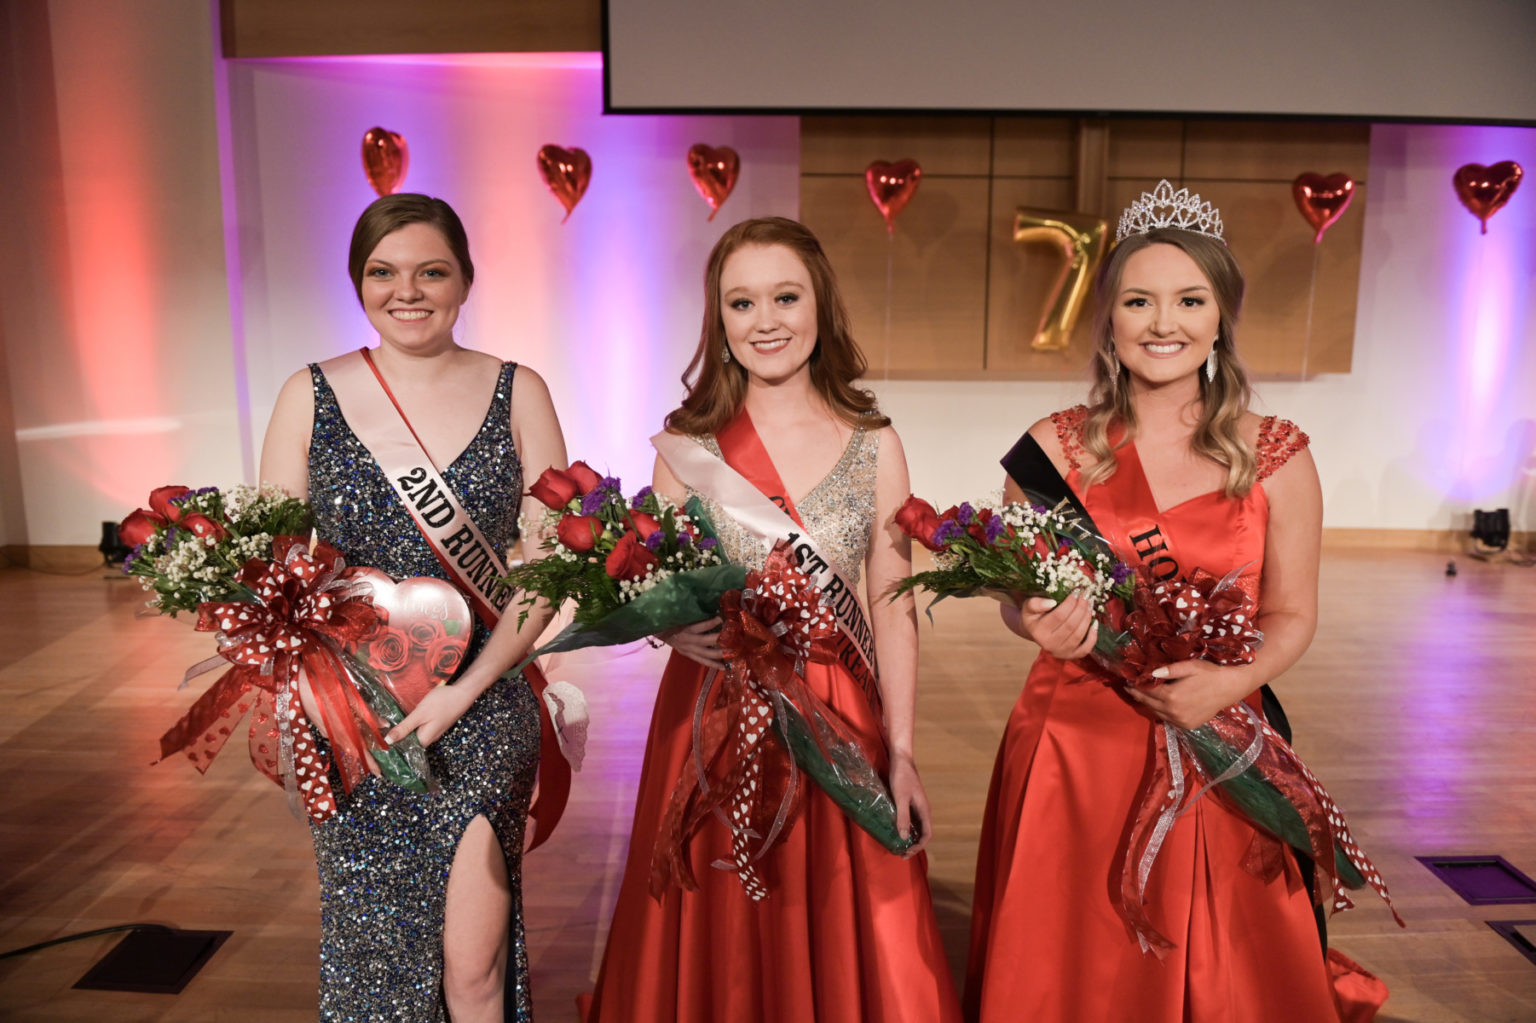 Baxter crowned queen at Campbellsville University’s 78th annual